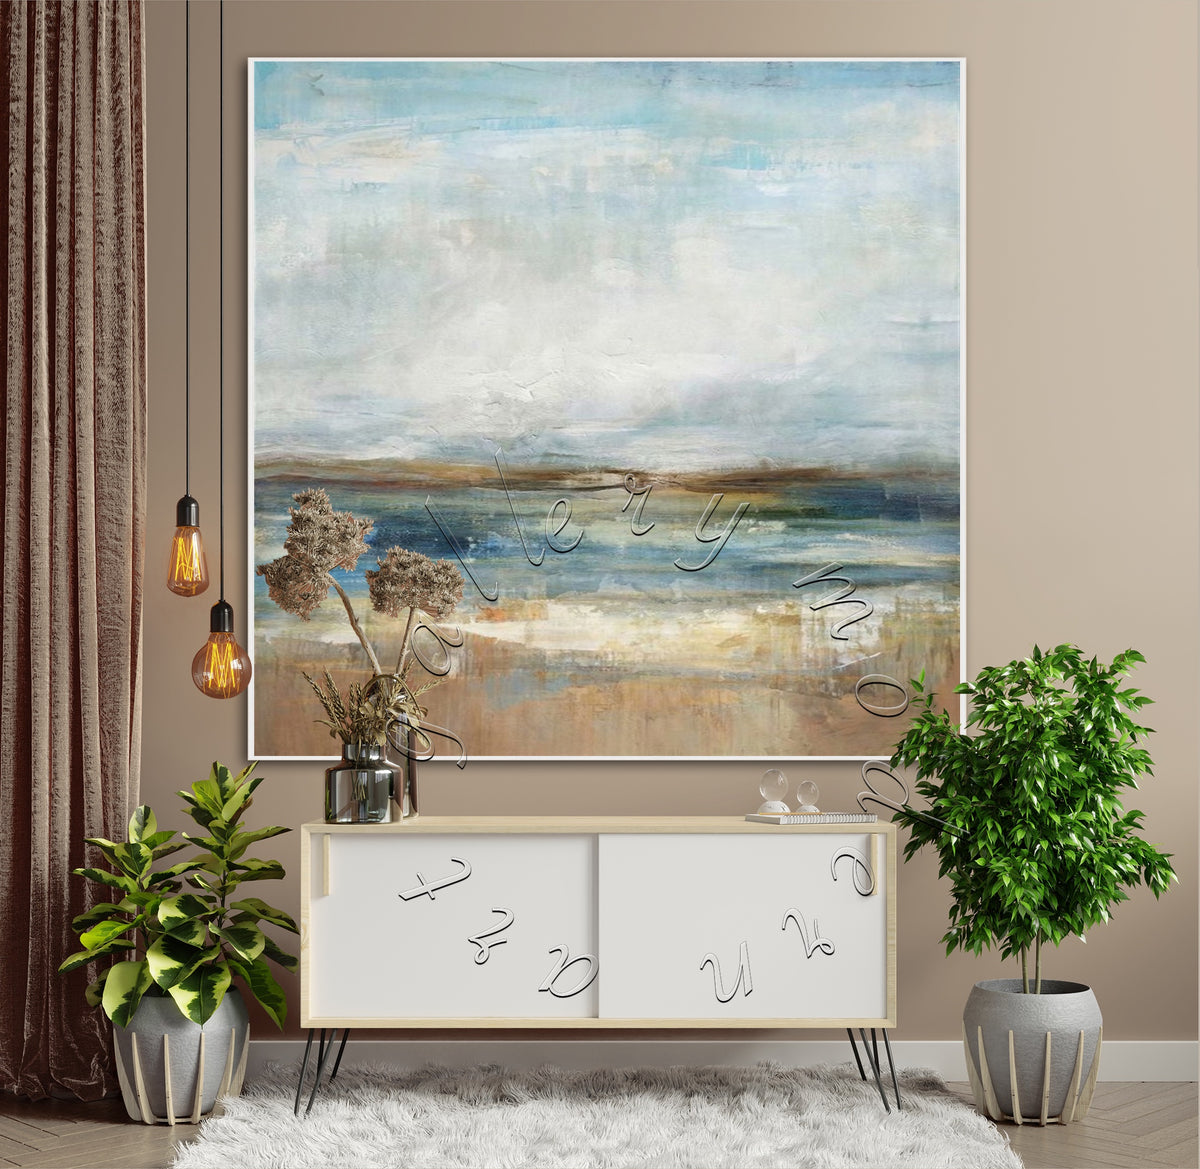 Large Colorful Abstract Seascape Original Painting on Canvas, Ocean Canvas Wall Art